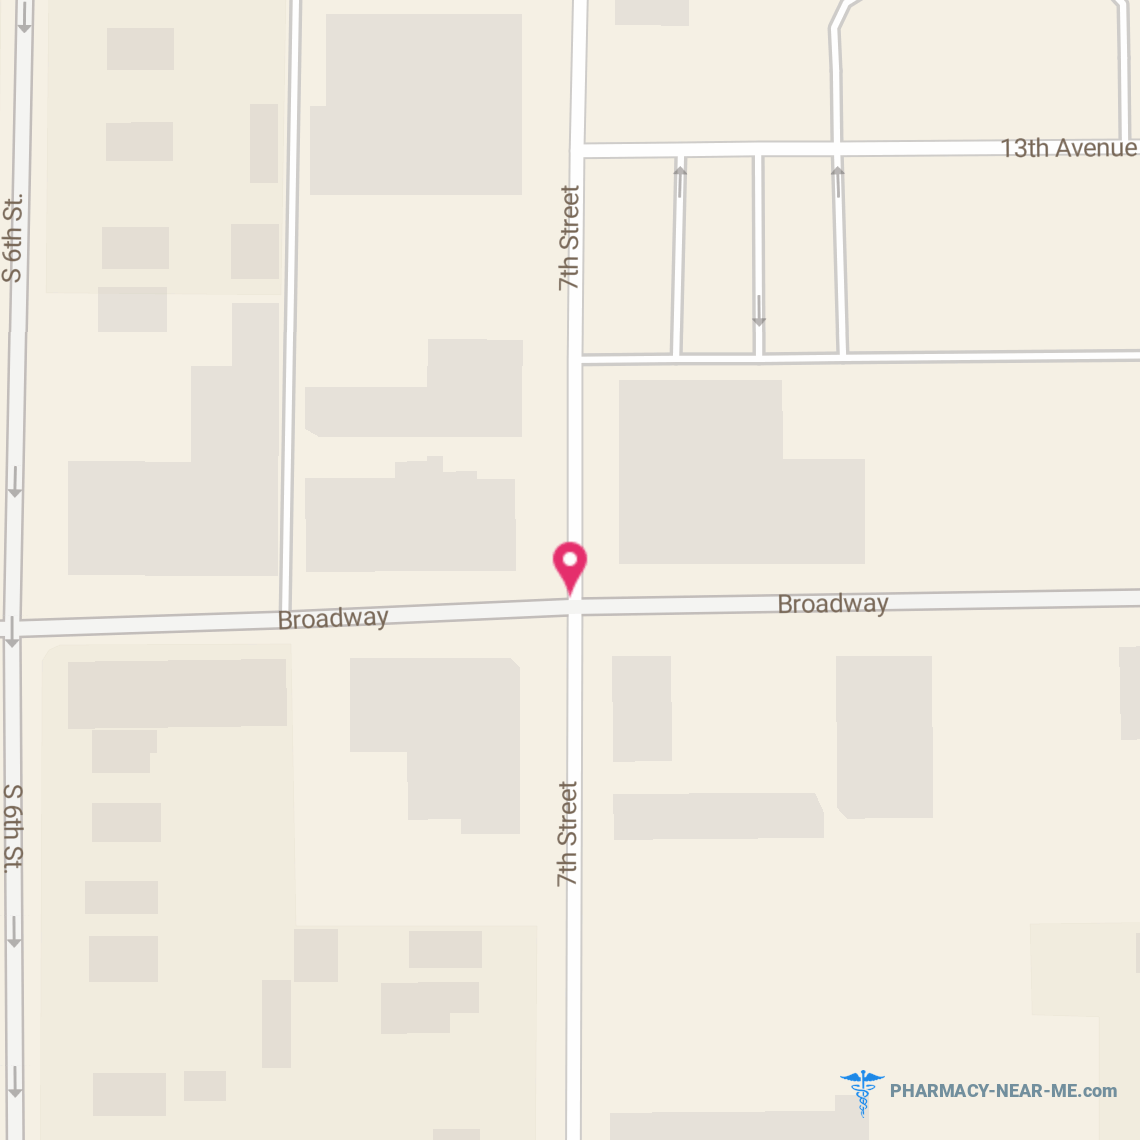 WALGREENS #16488 - Pharmacy Hours, Phone, Reviews & Information: 1100 Broadway, Rockford, Illinois 61104, United States